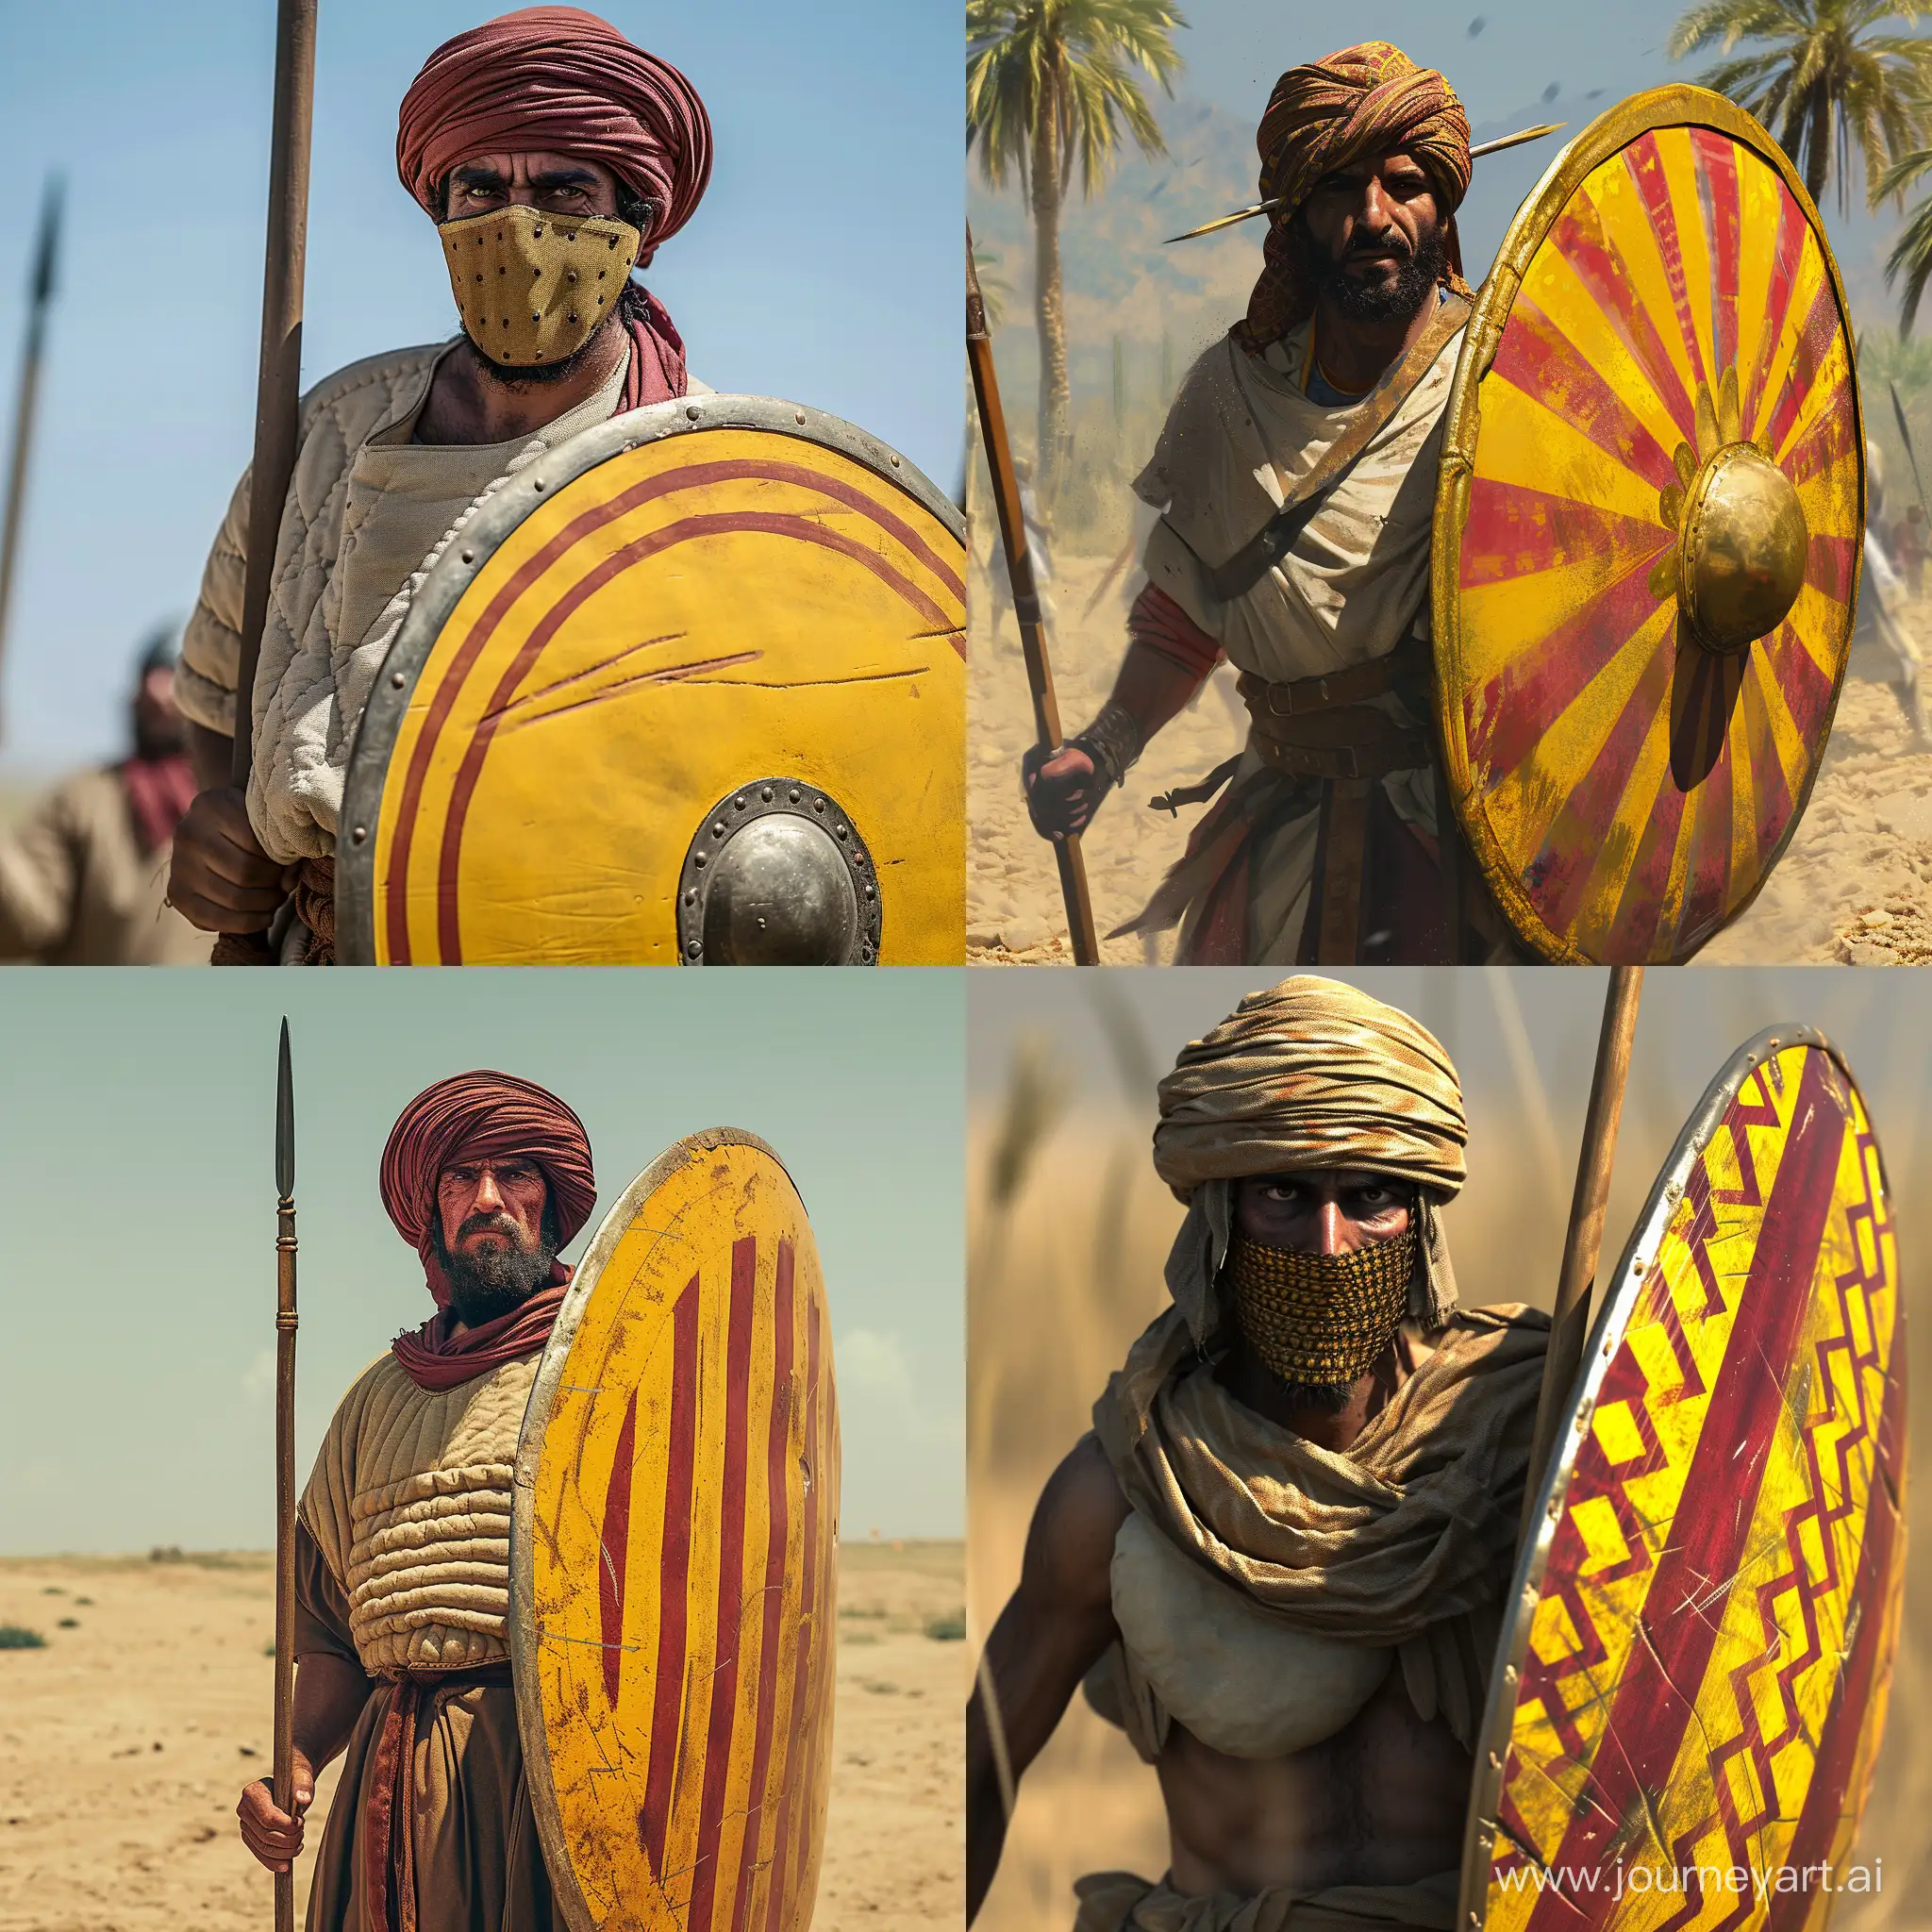 Achaemenid Sparabara spearman soldier at battle field. Wearing simple padded cloth tunic and open face headwrap which including his jaw. Equipping large yellow-red striped rectangle shield. Realistic image.